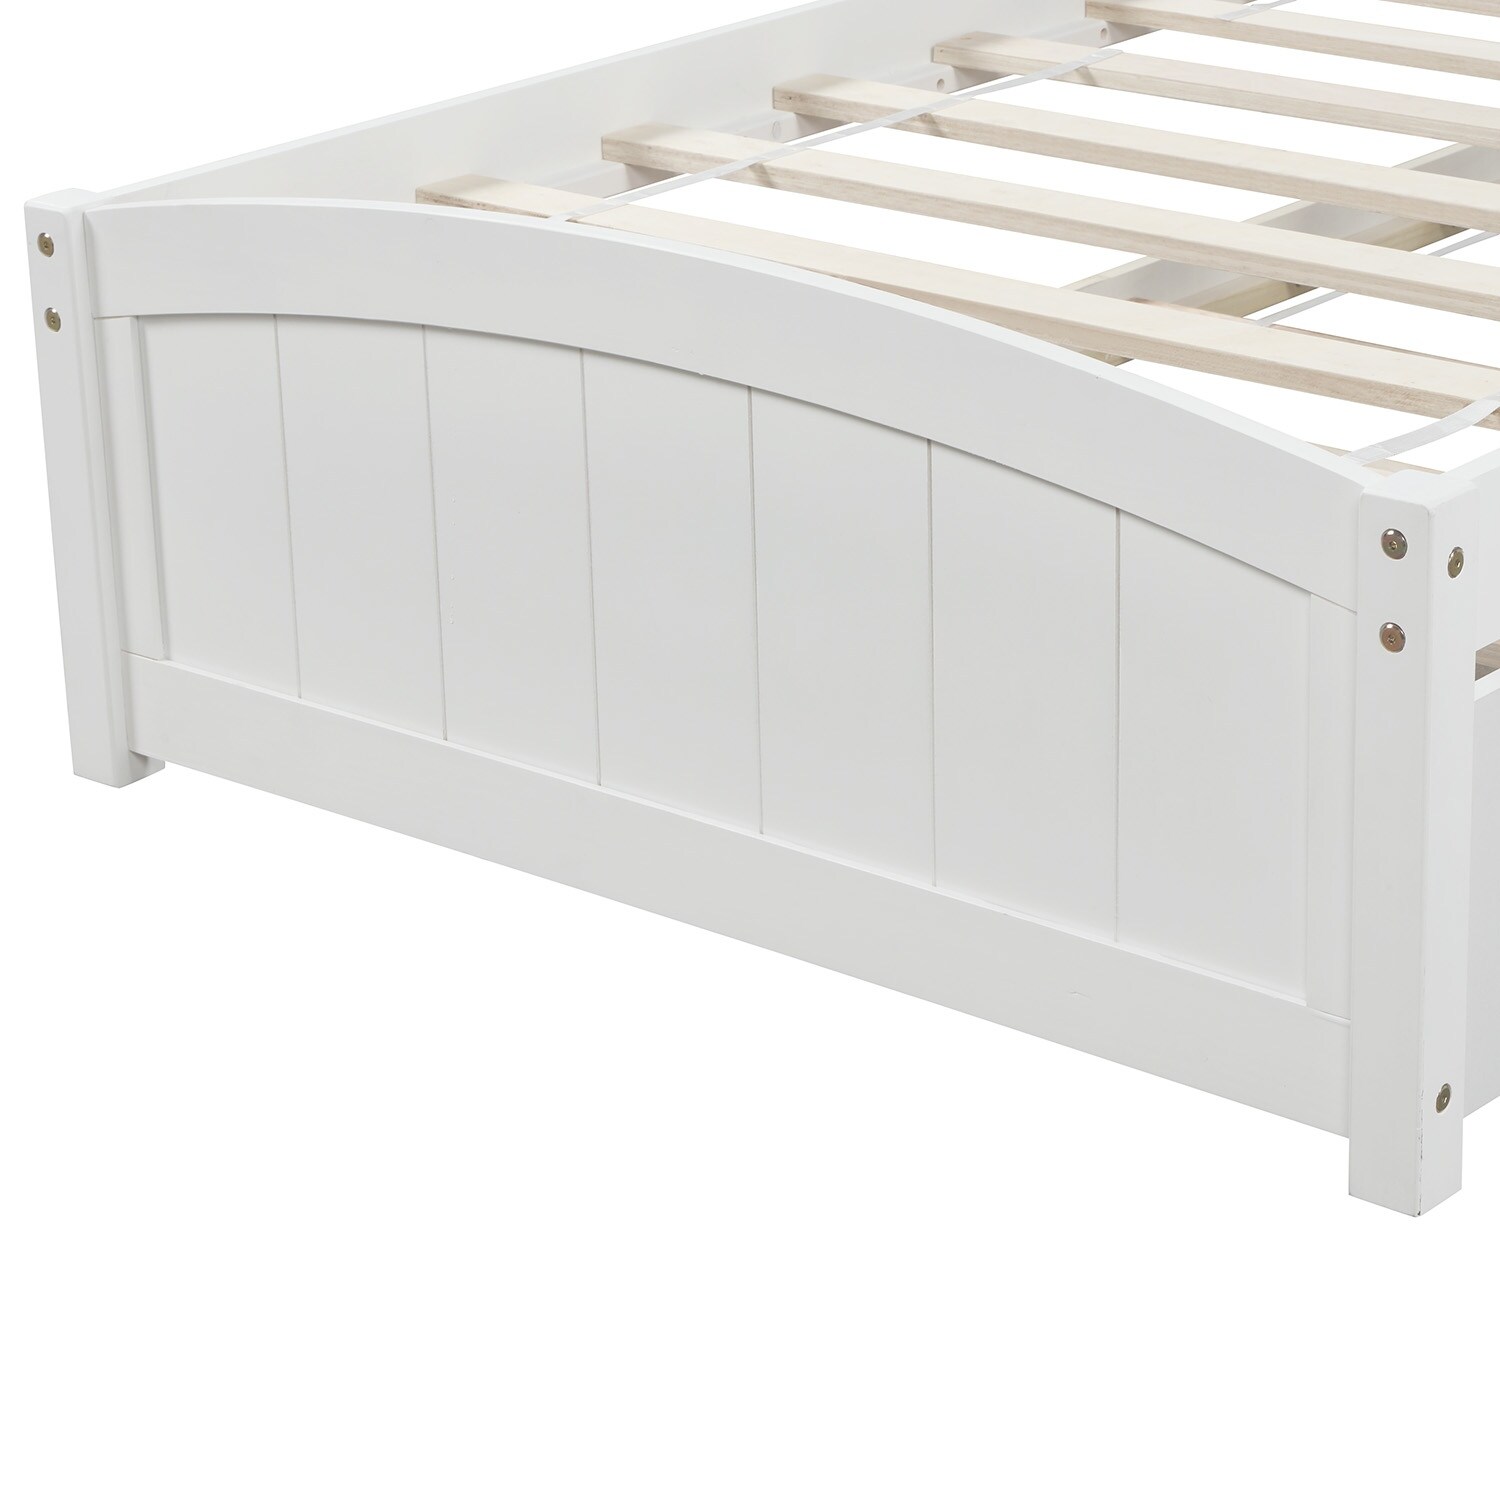 Easy Assemble Modern Twin Wood Platform Bed with Twin Trundle for Small Aprtment Dorm Bedroom, No Box Spring Needed